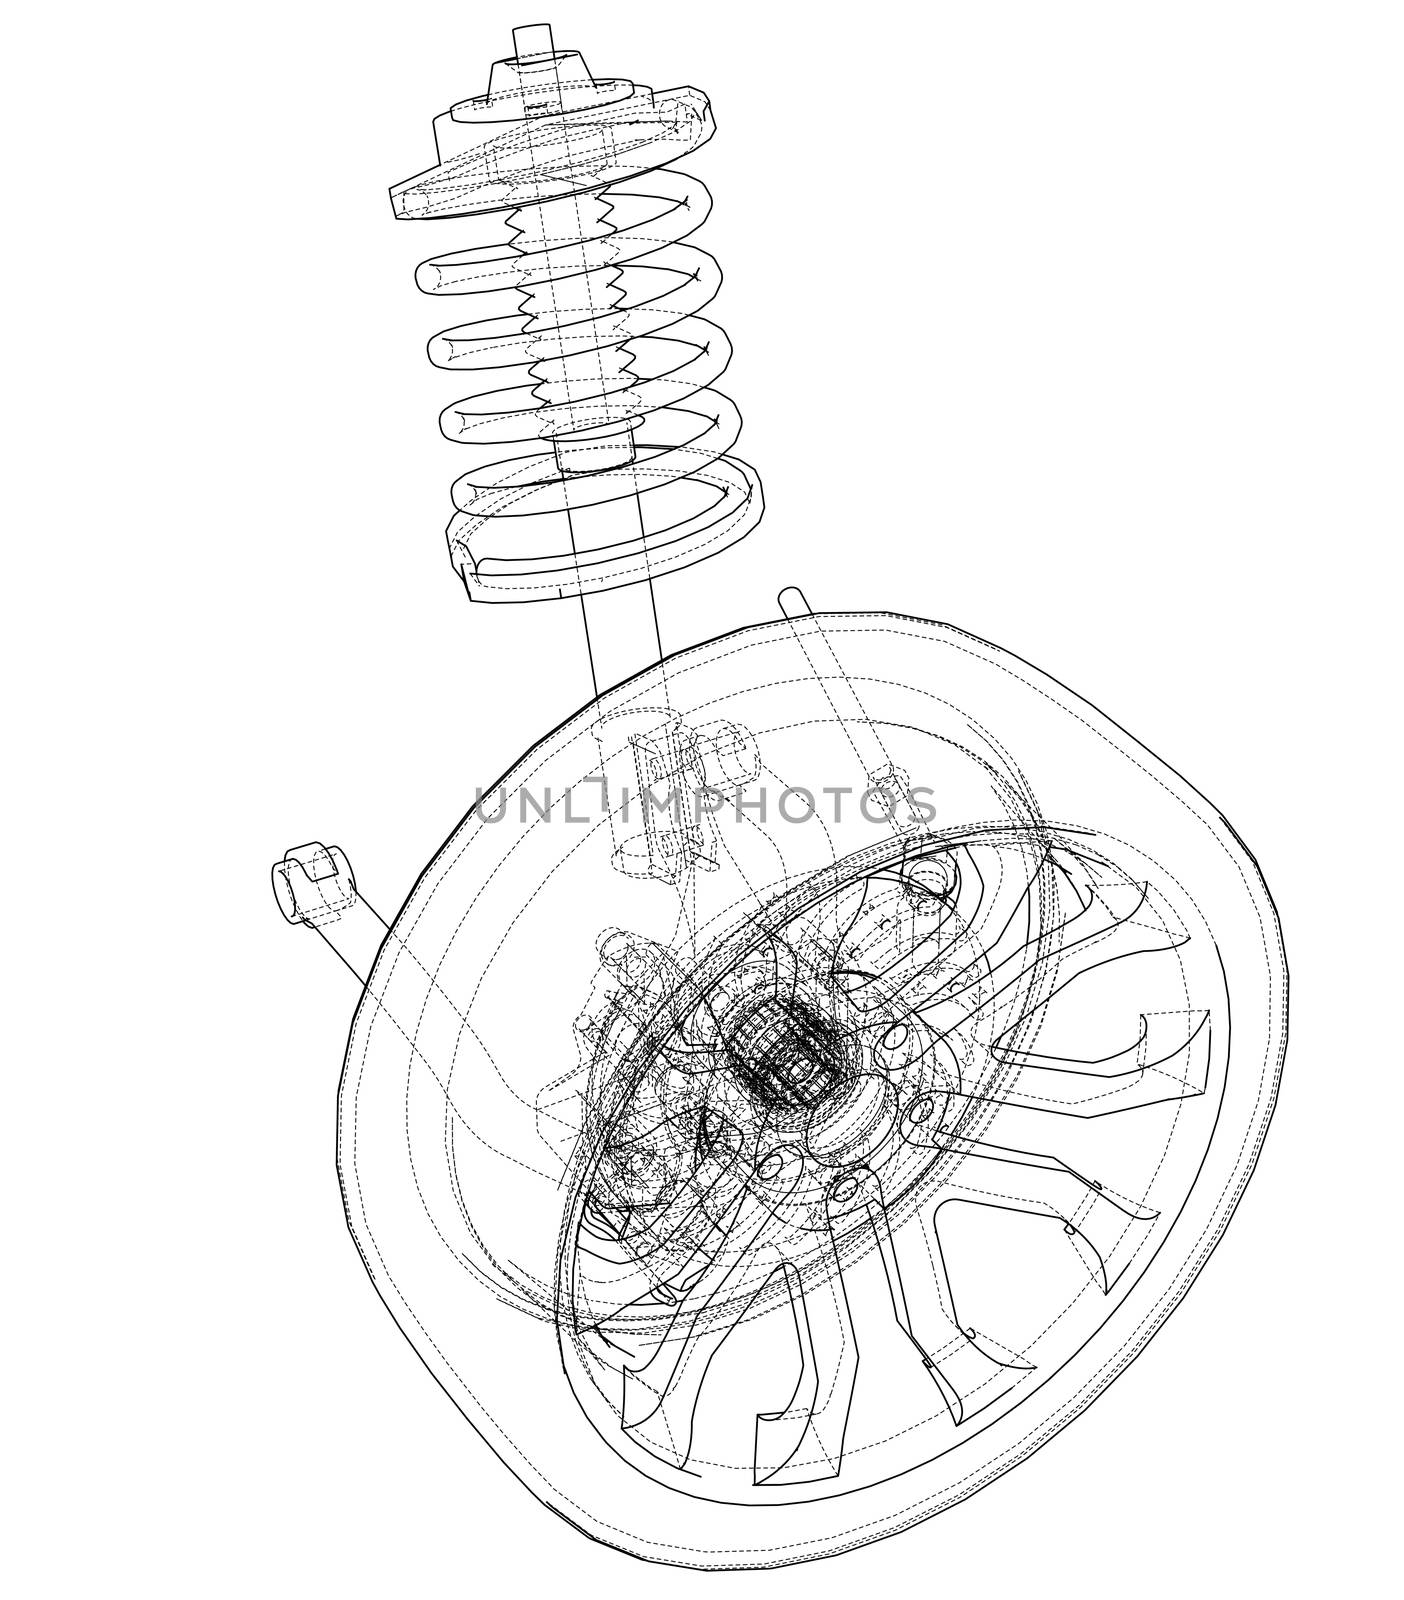 Car suspension with wheel tire and shock absorber. 3d illustration. Wire-frame style